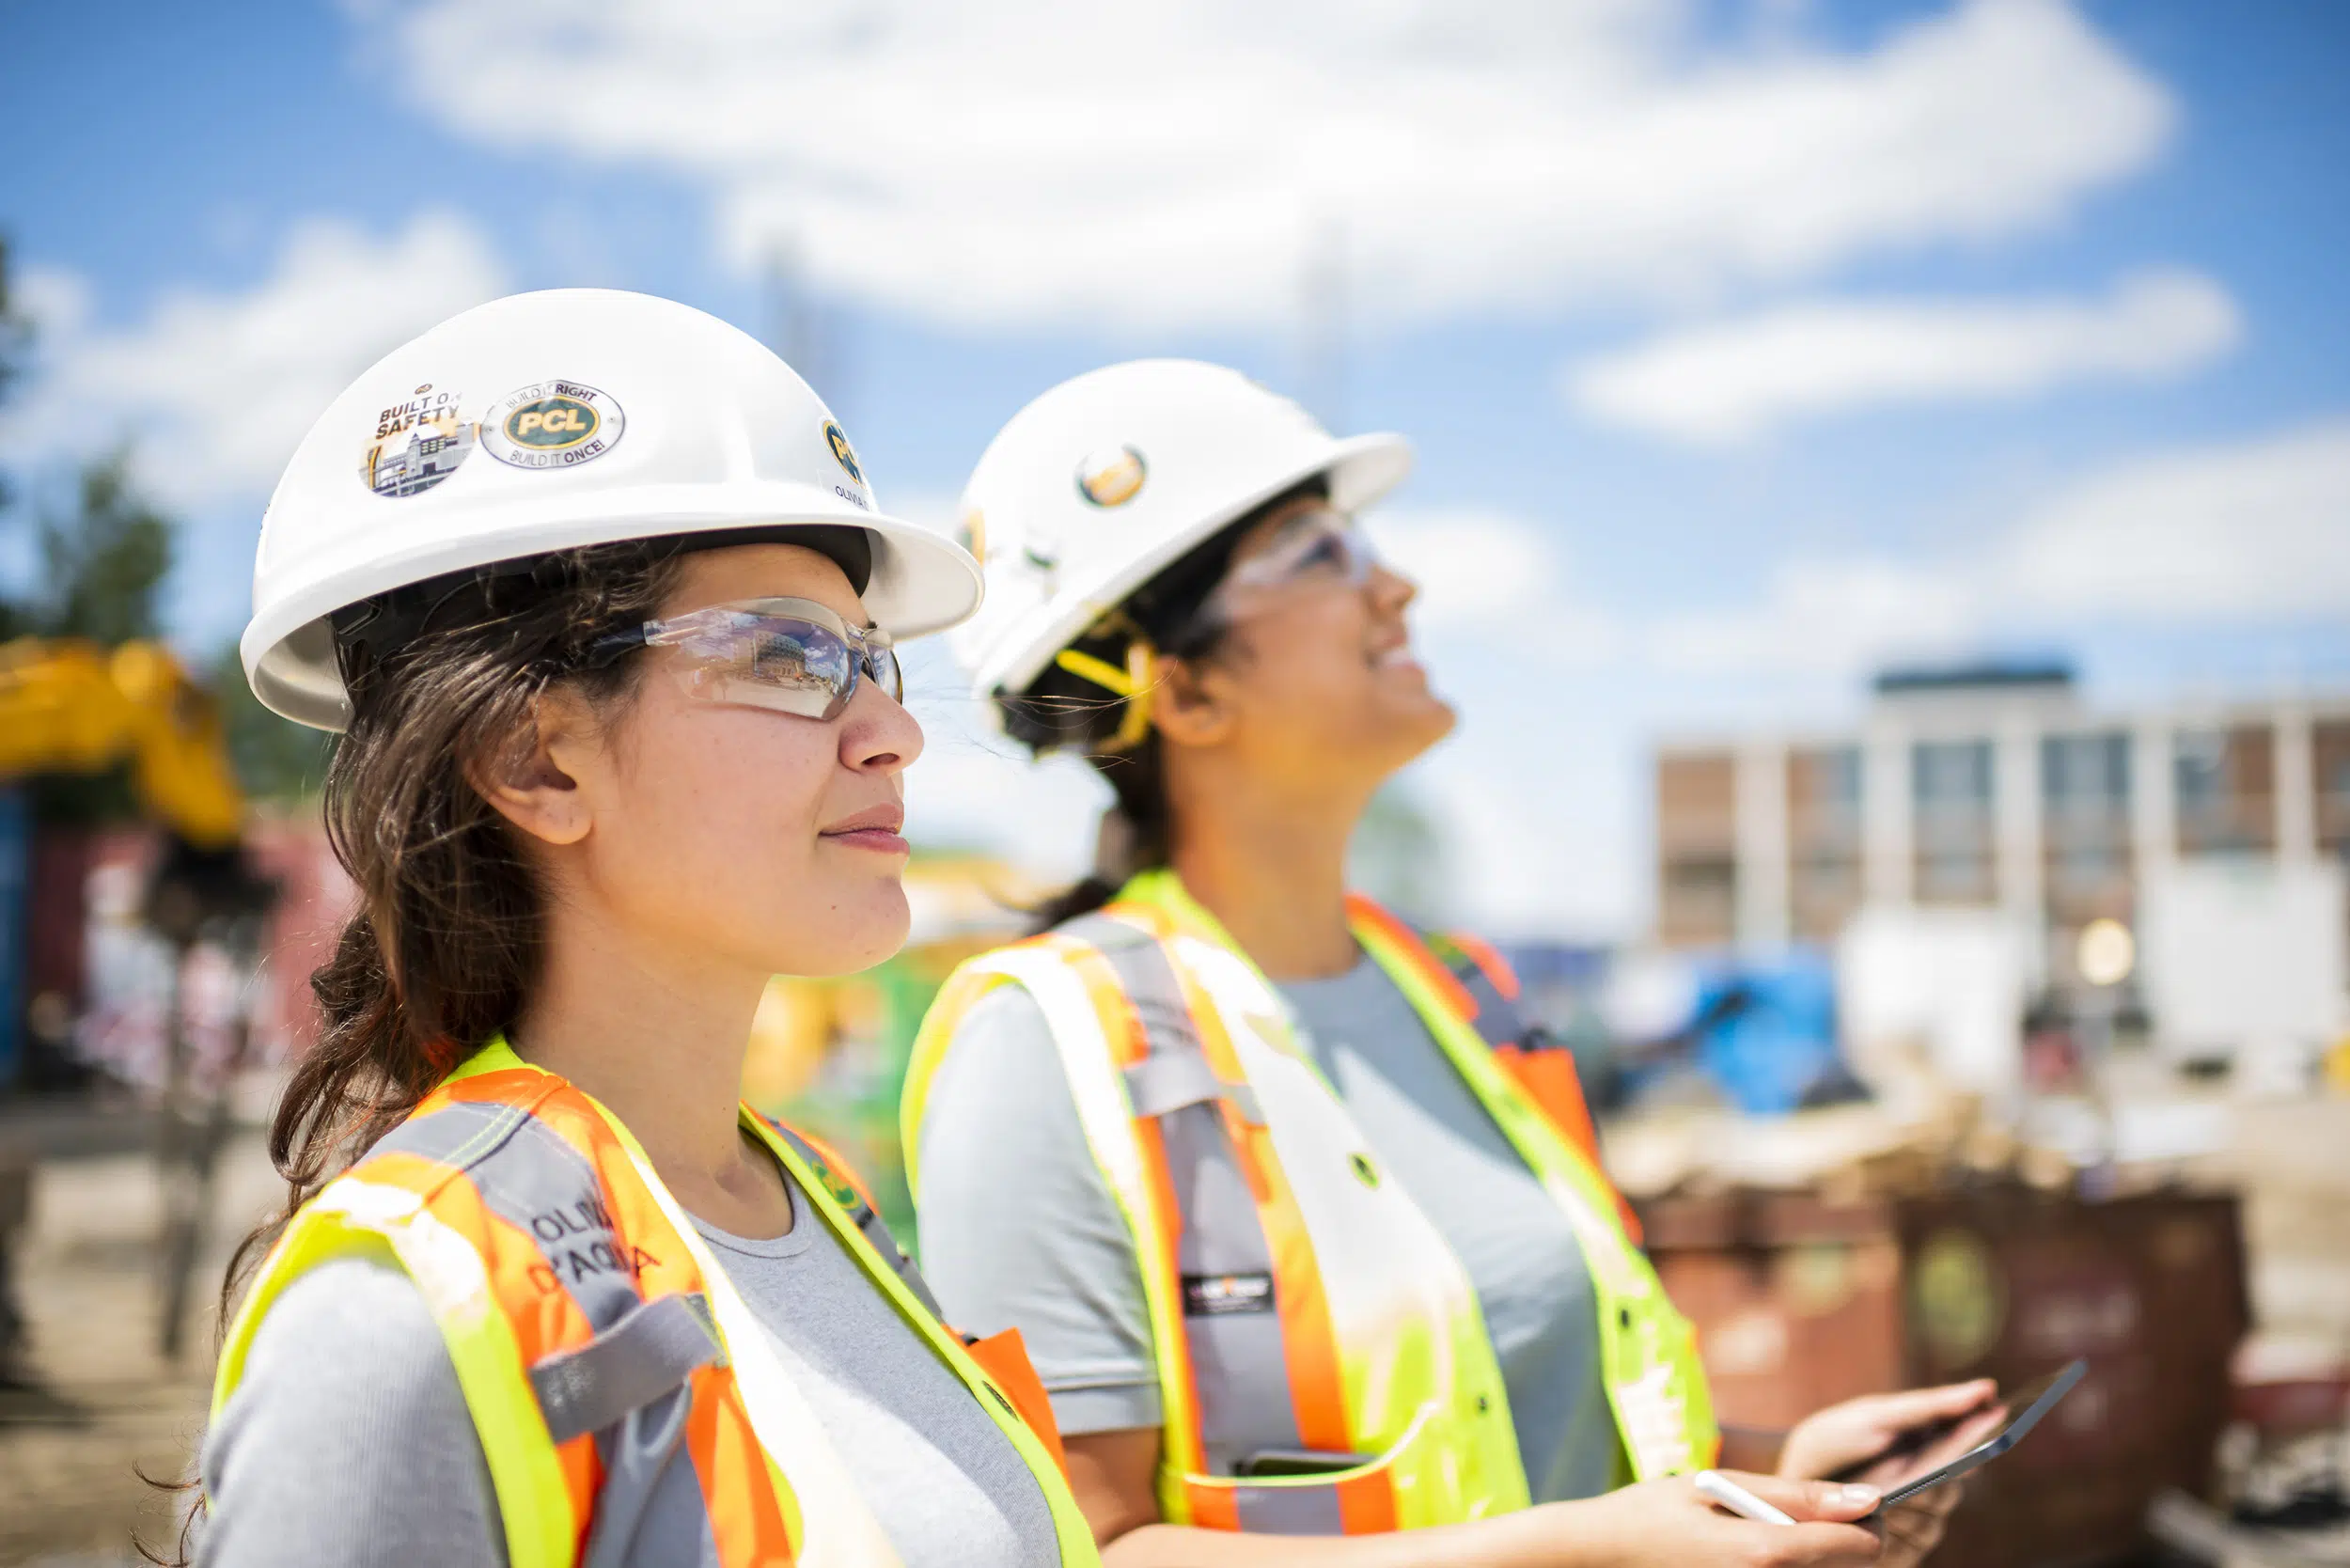 Two young female construction workers are pictured looking in the distance. One holds a tablet.